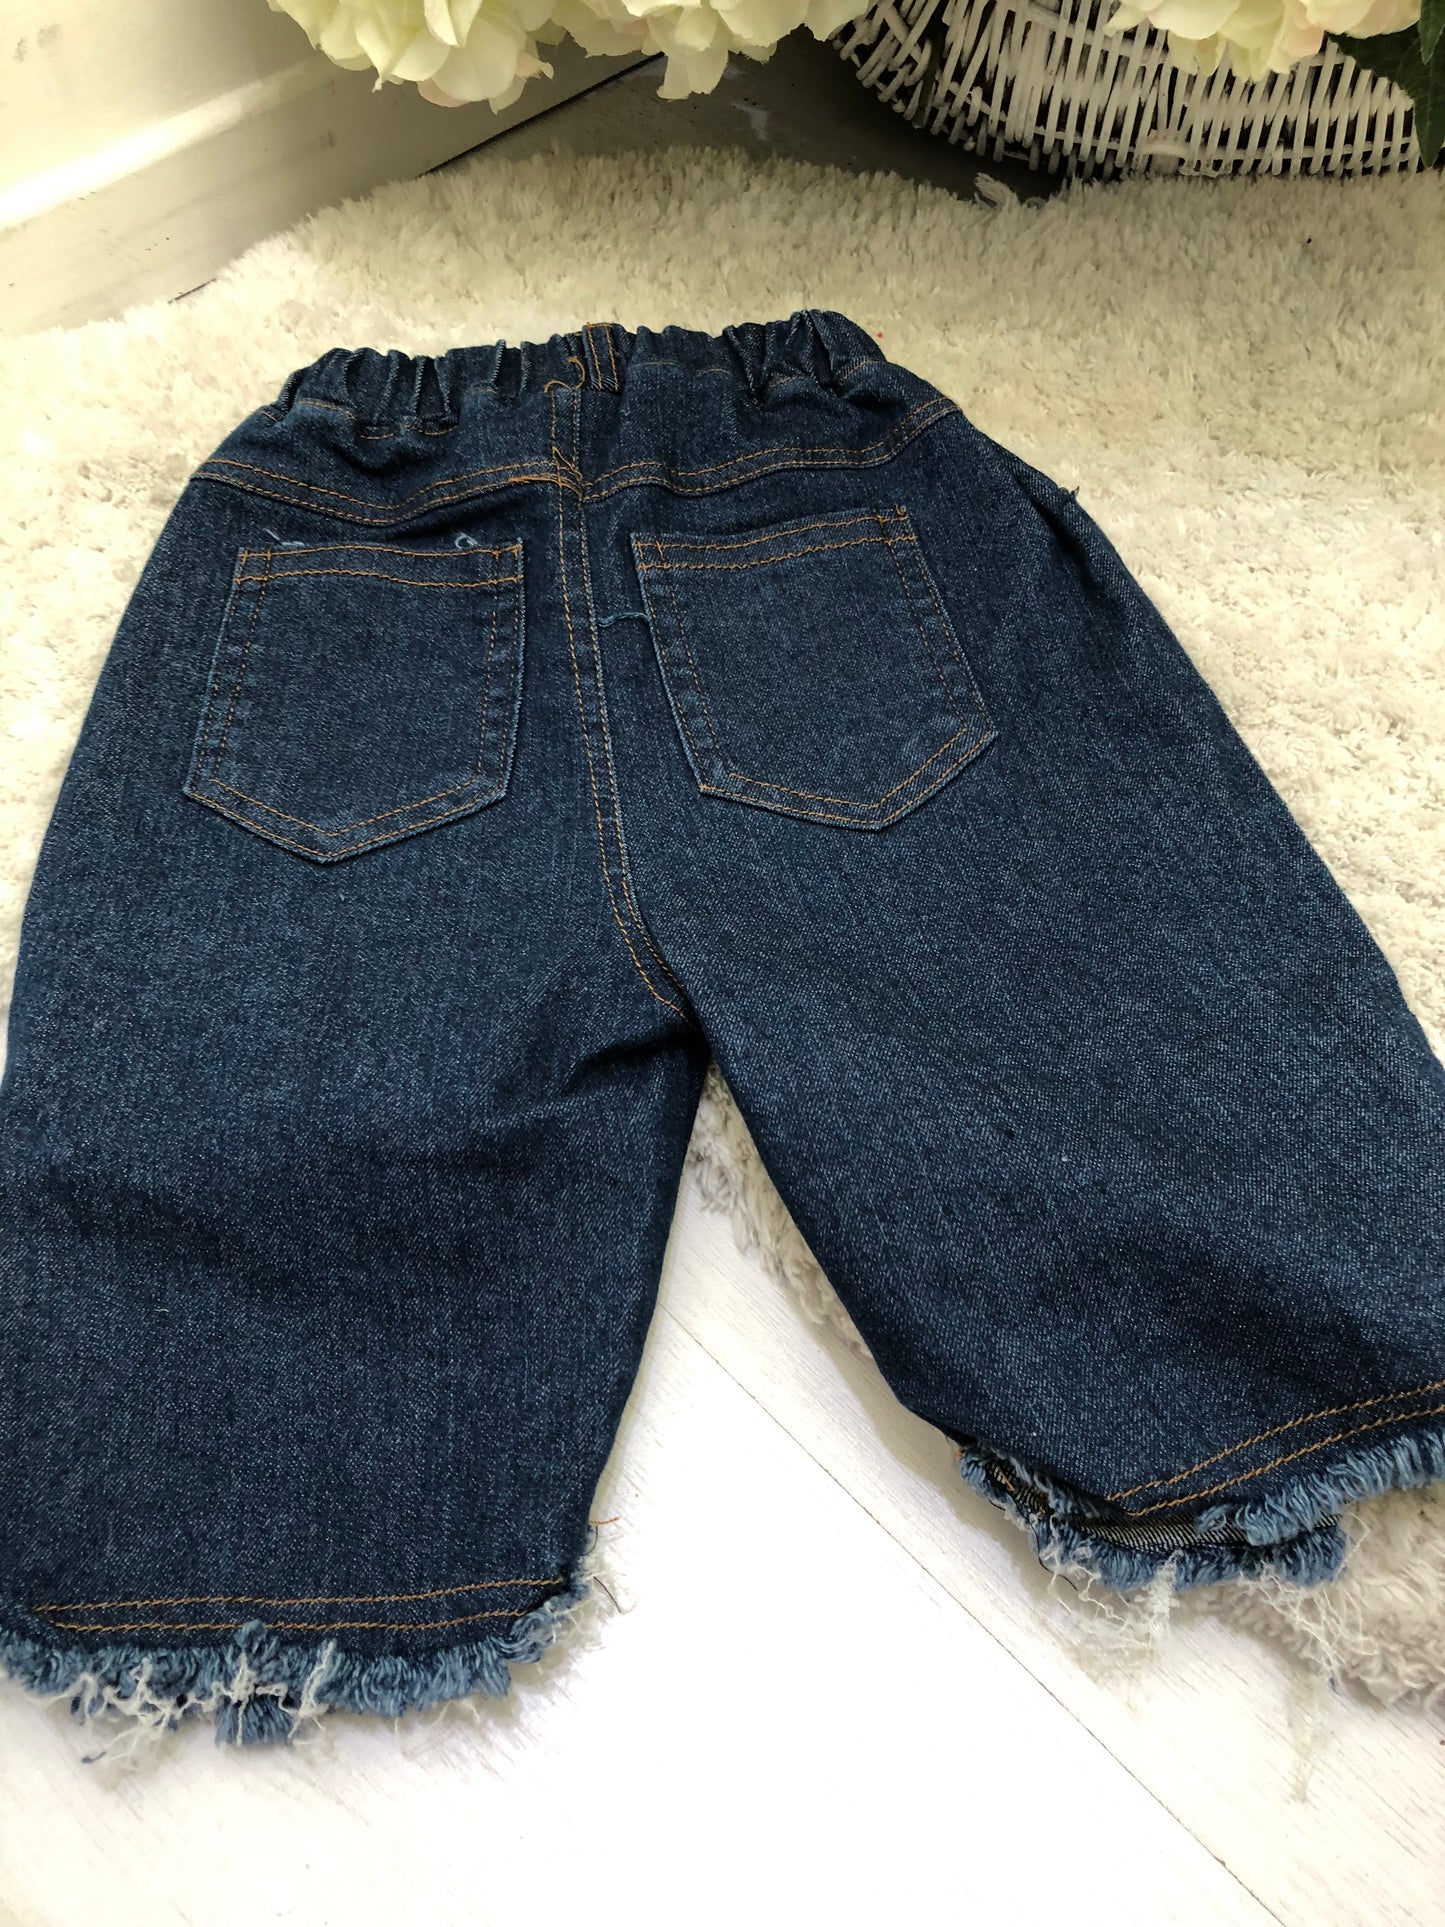 Denim Shorts 5-6 years only